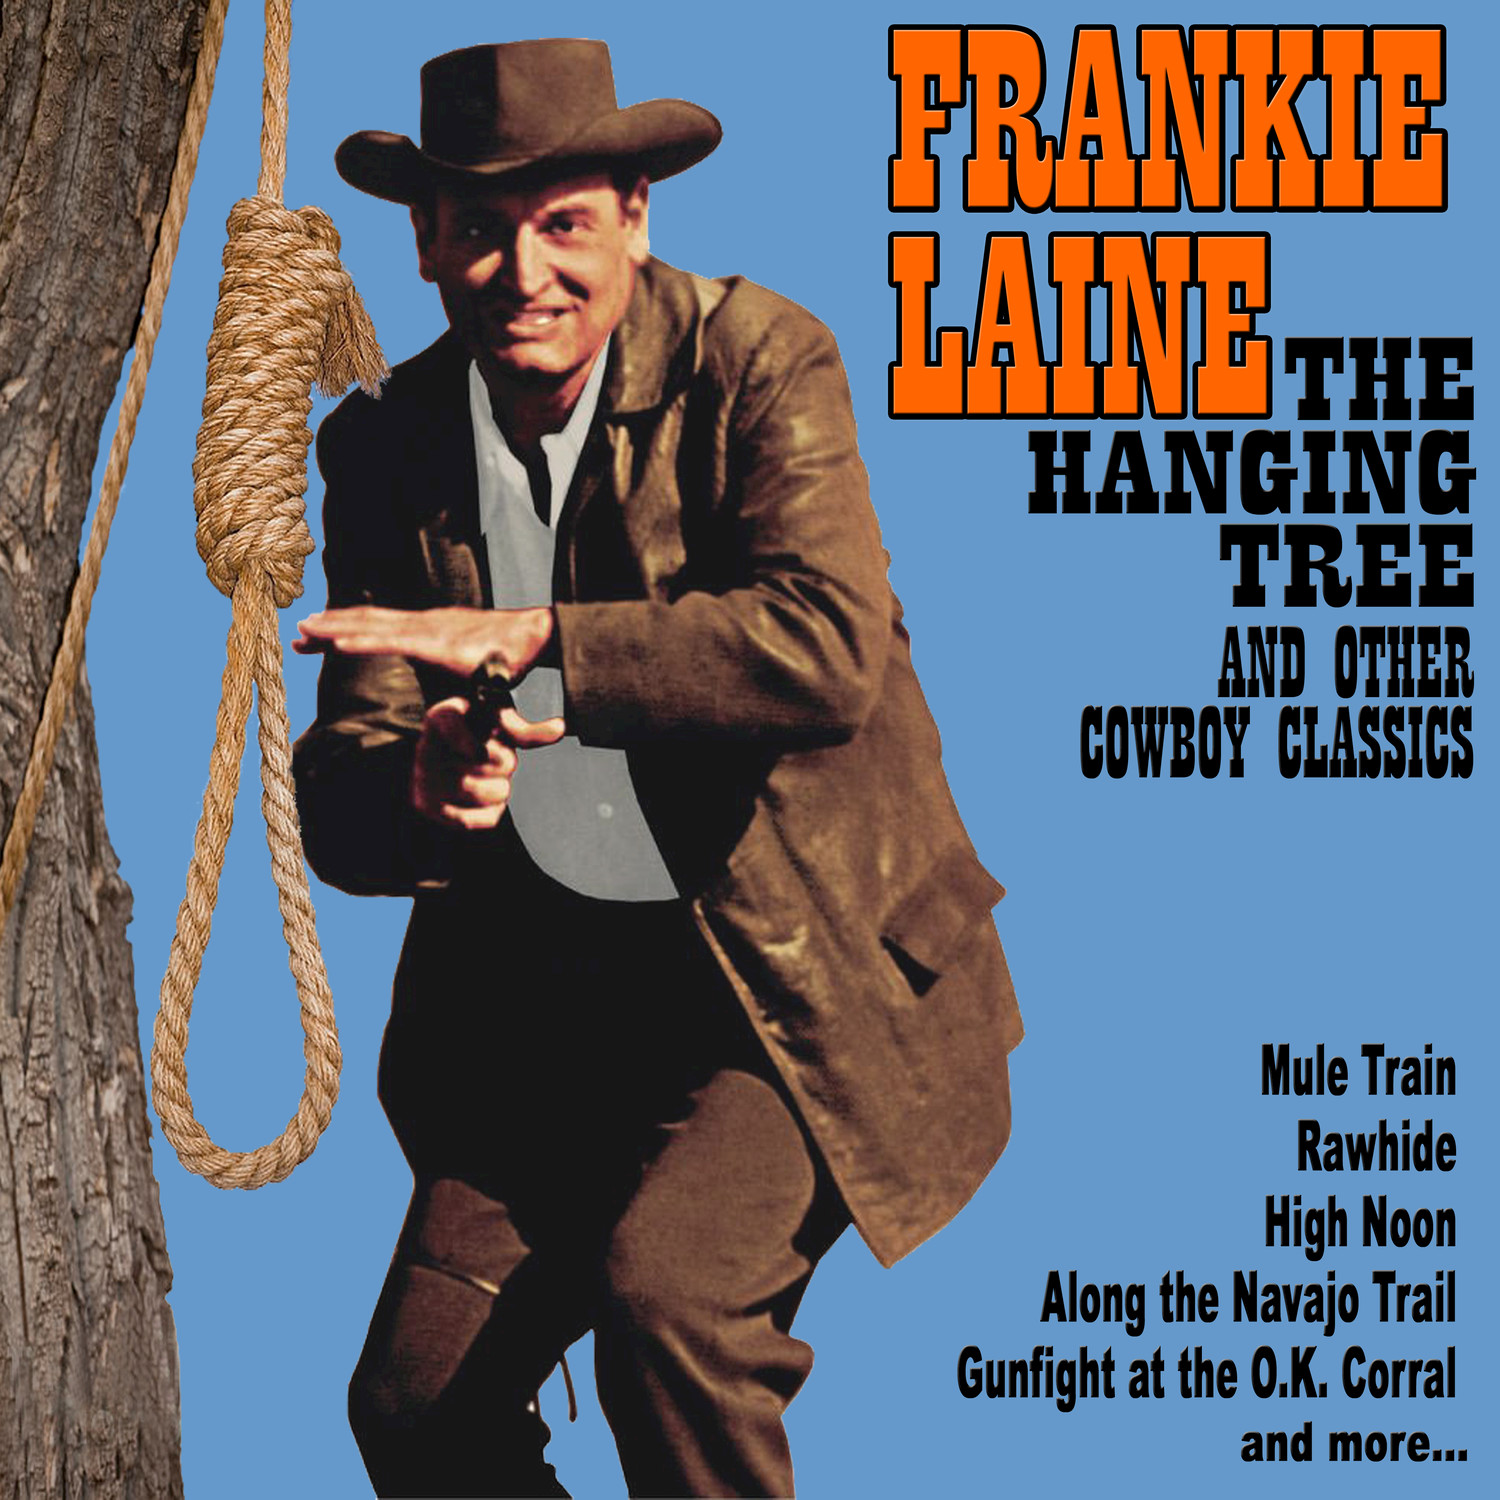 The Hanging Tree - Frankie Laines' Cowboy Collection